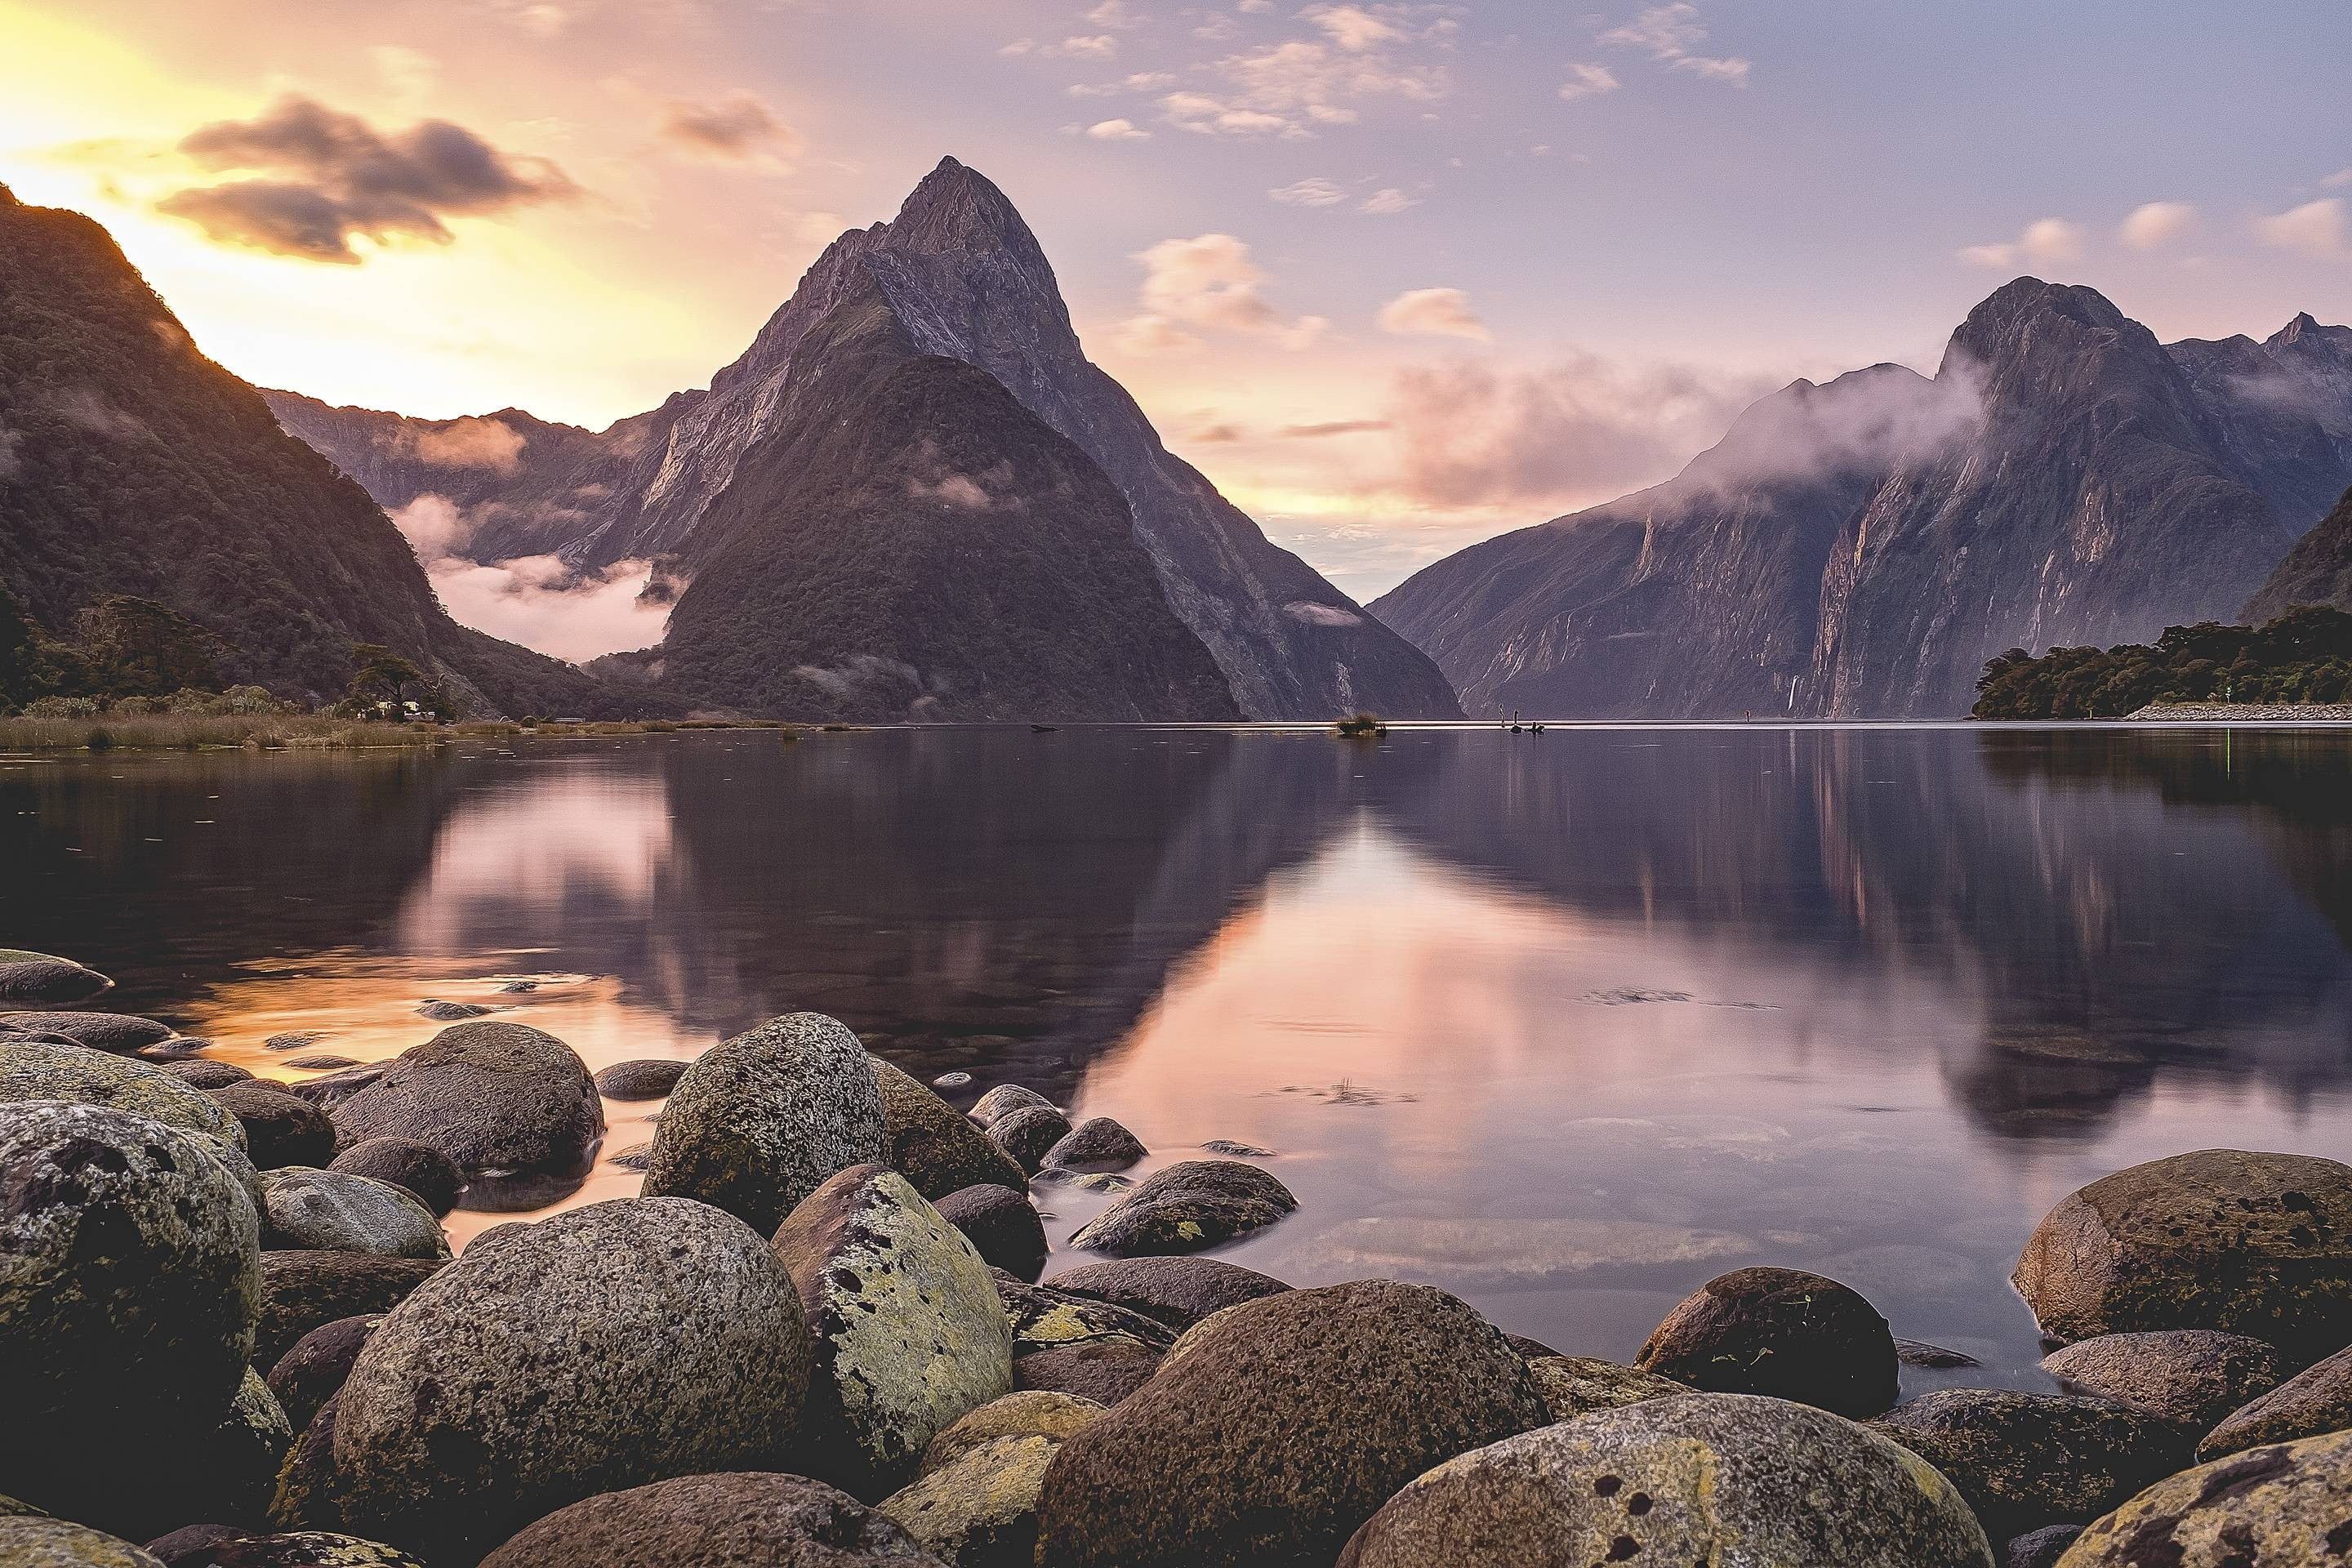 stones, body of water and mountain, Milford Sound, New Zealand, rock, lake